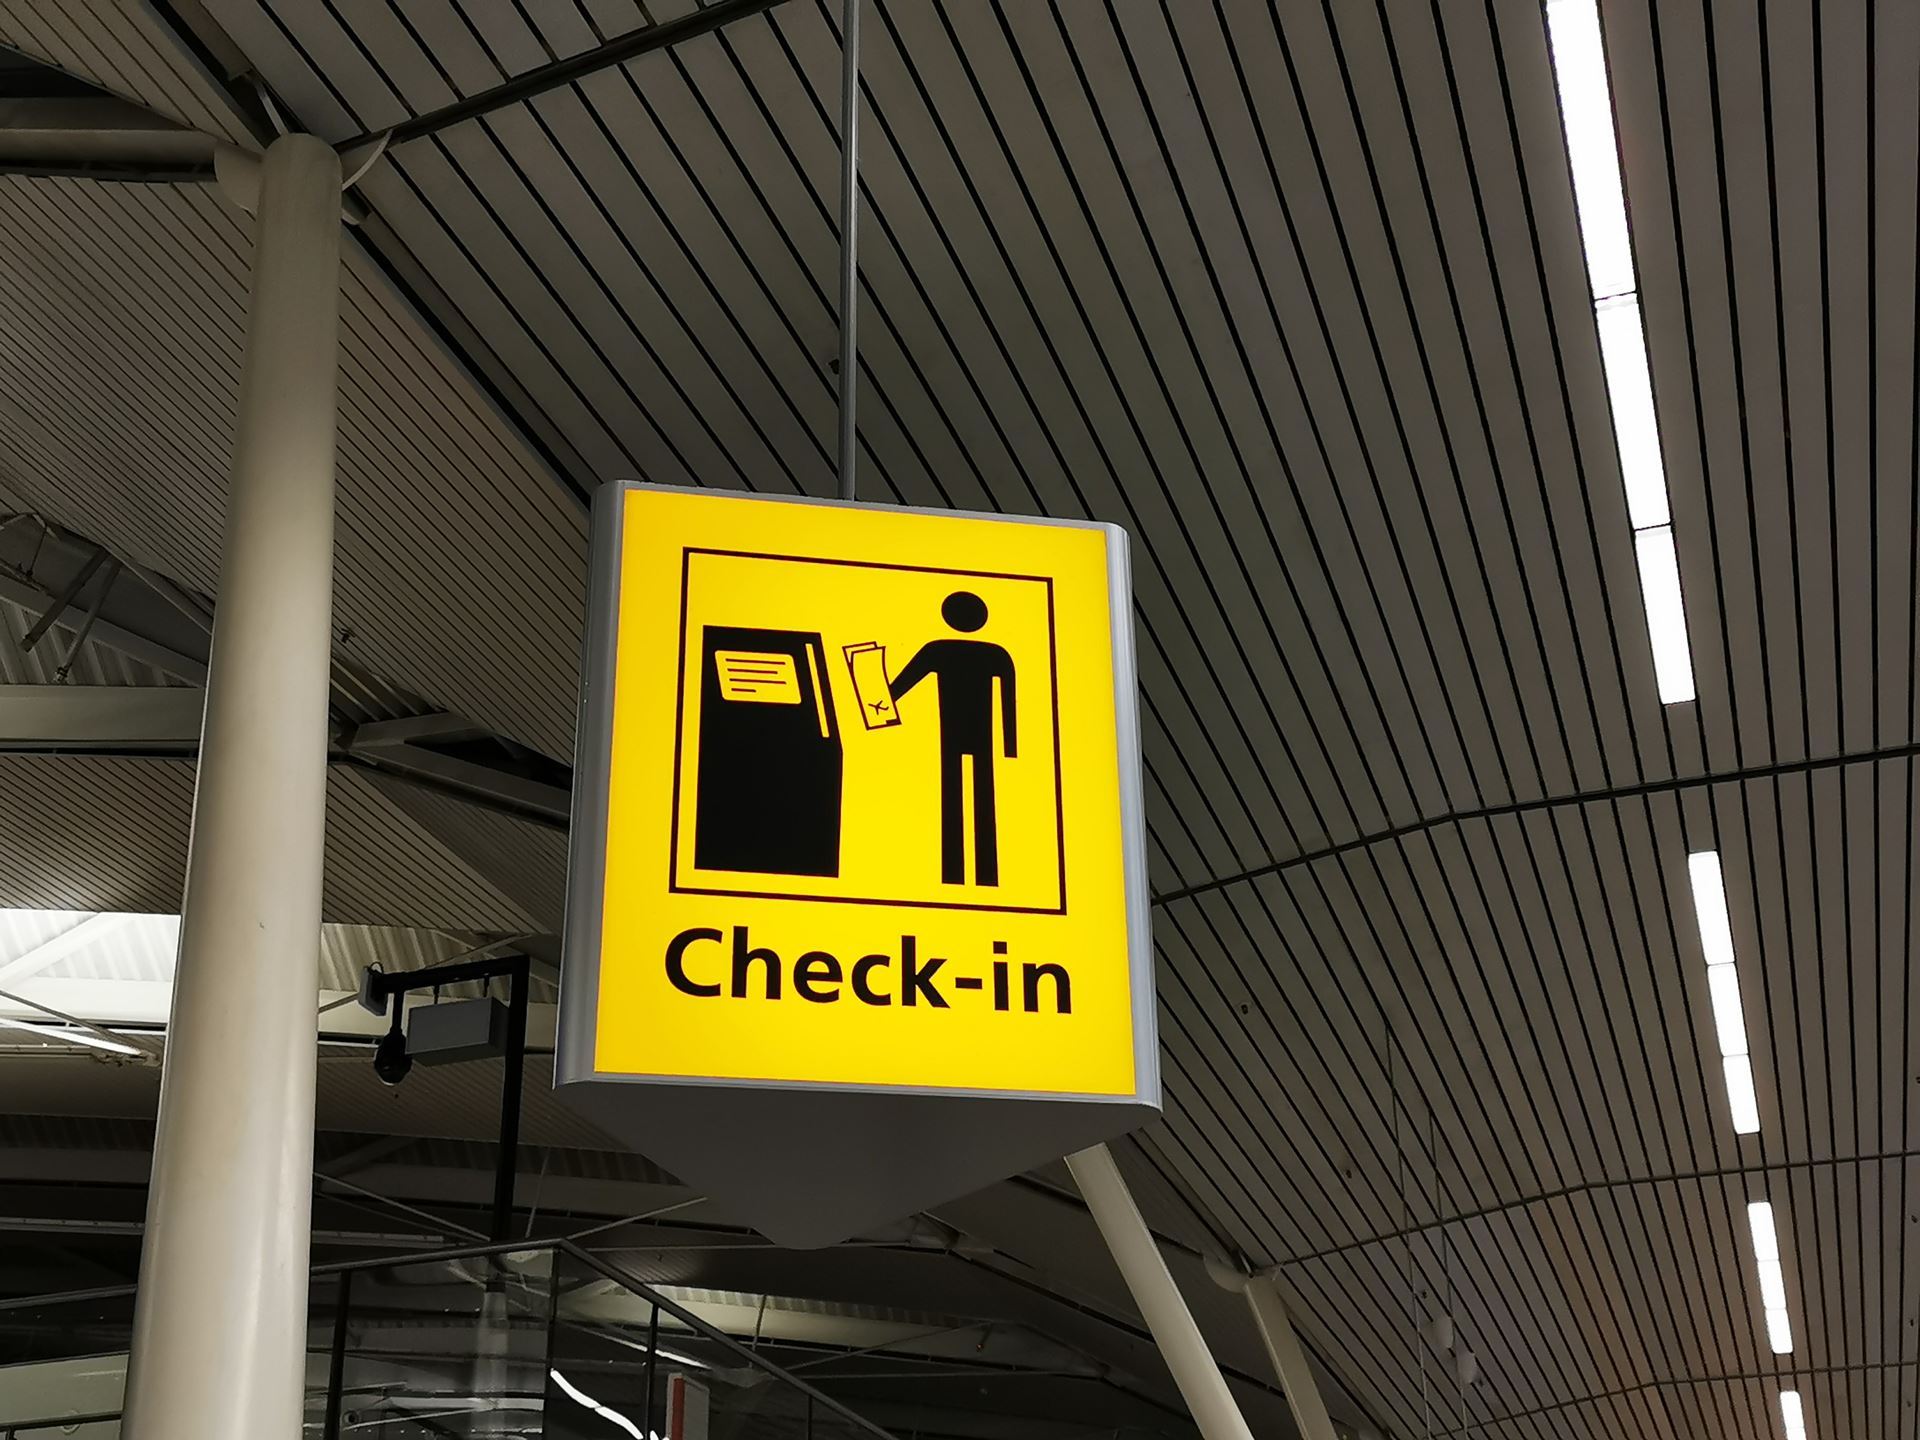 An airport check-in sign